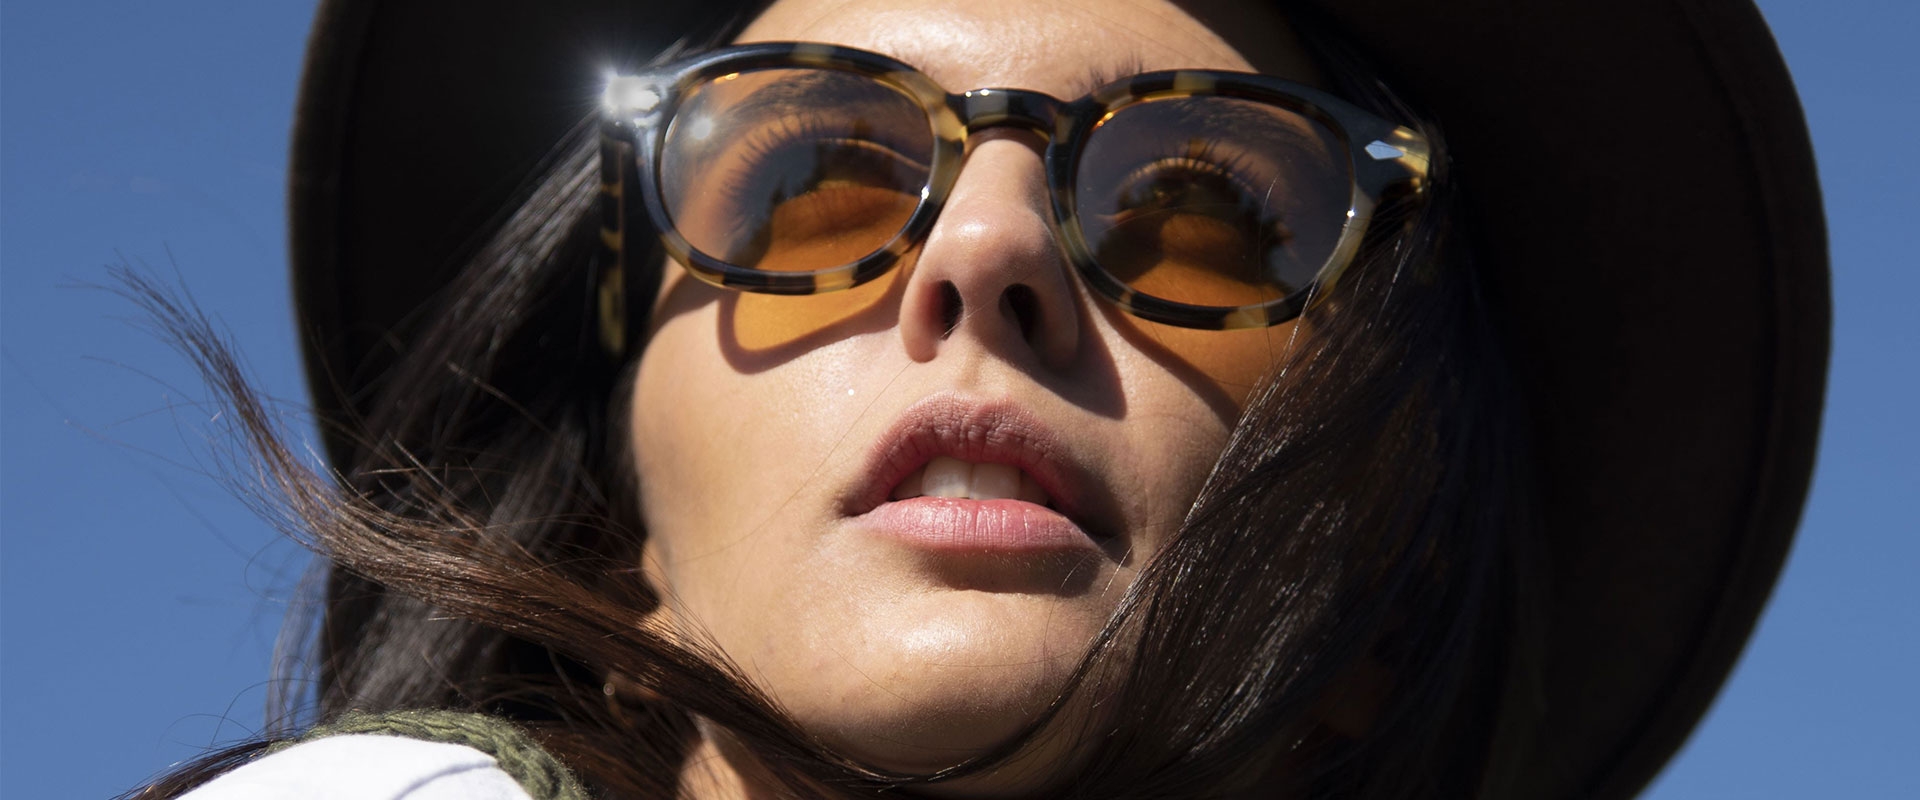 Find the perfect sunglasses for your face tone